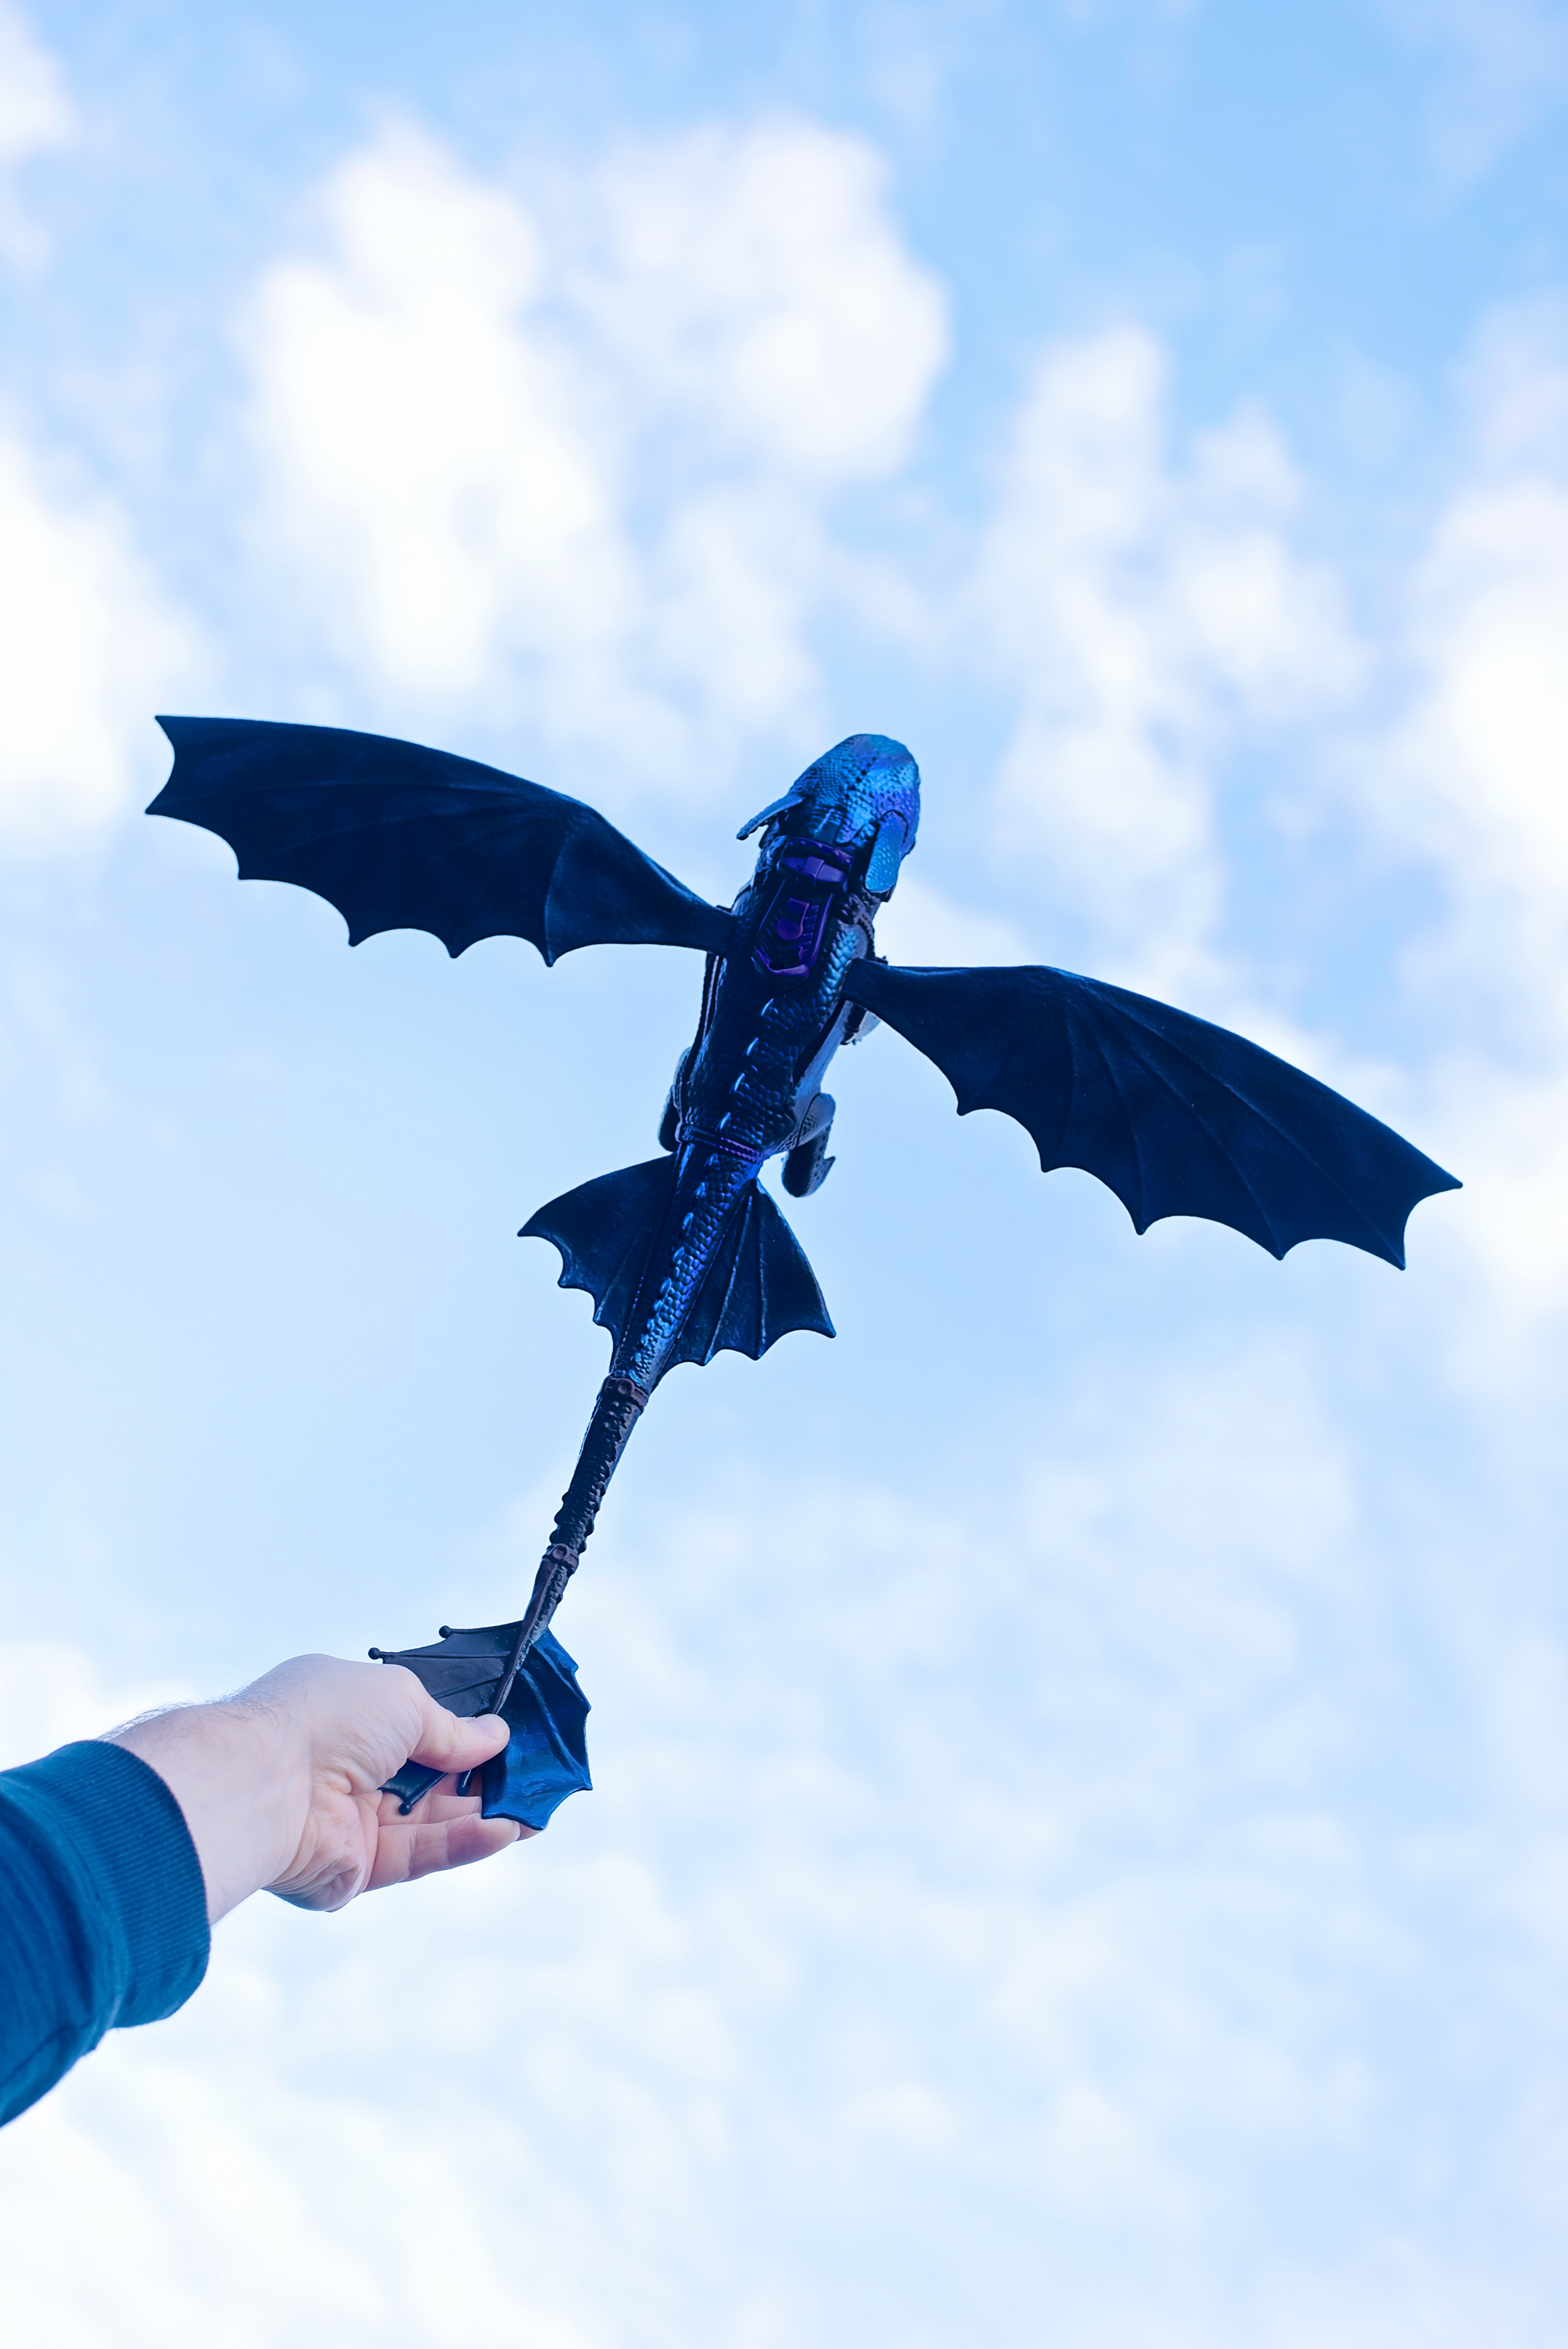 HOW TO TRAIN YOUR DRAGON TOYS